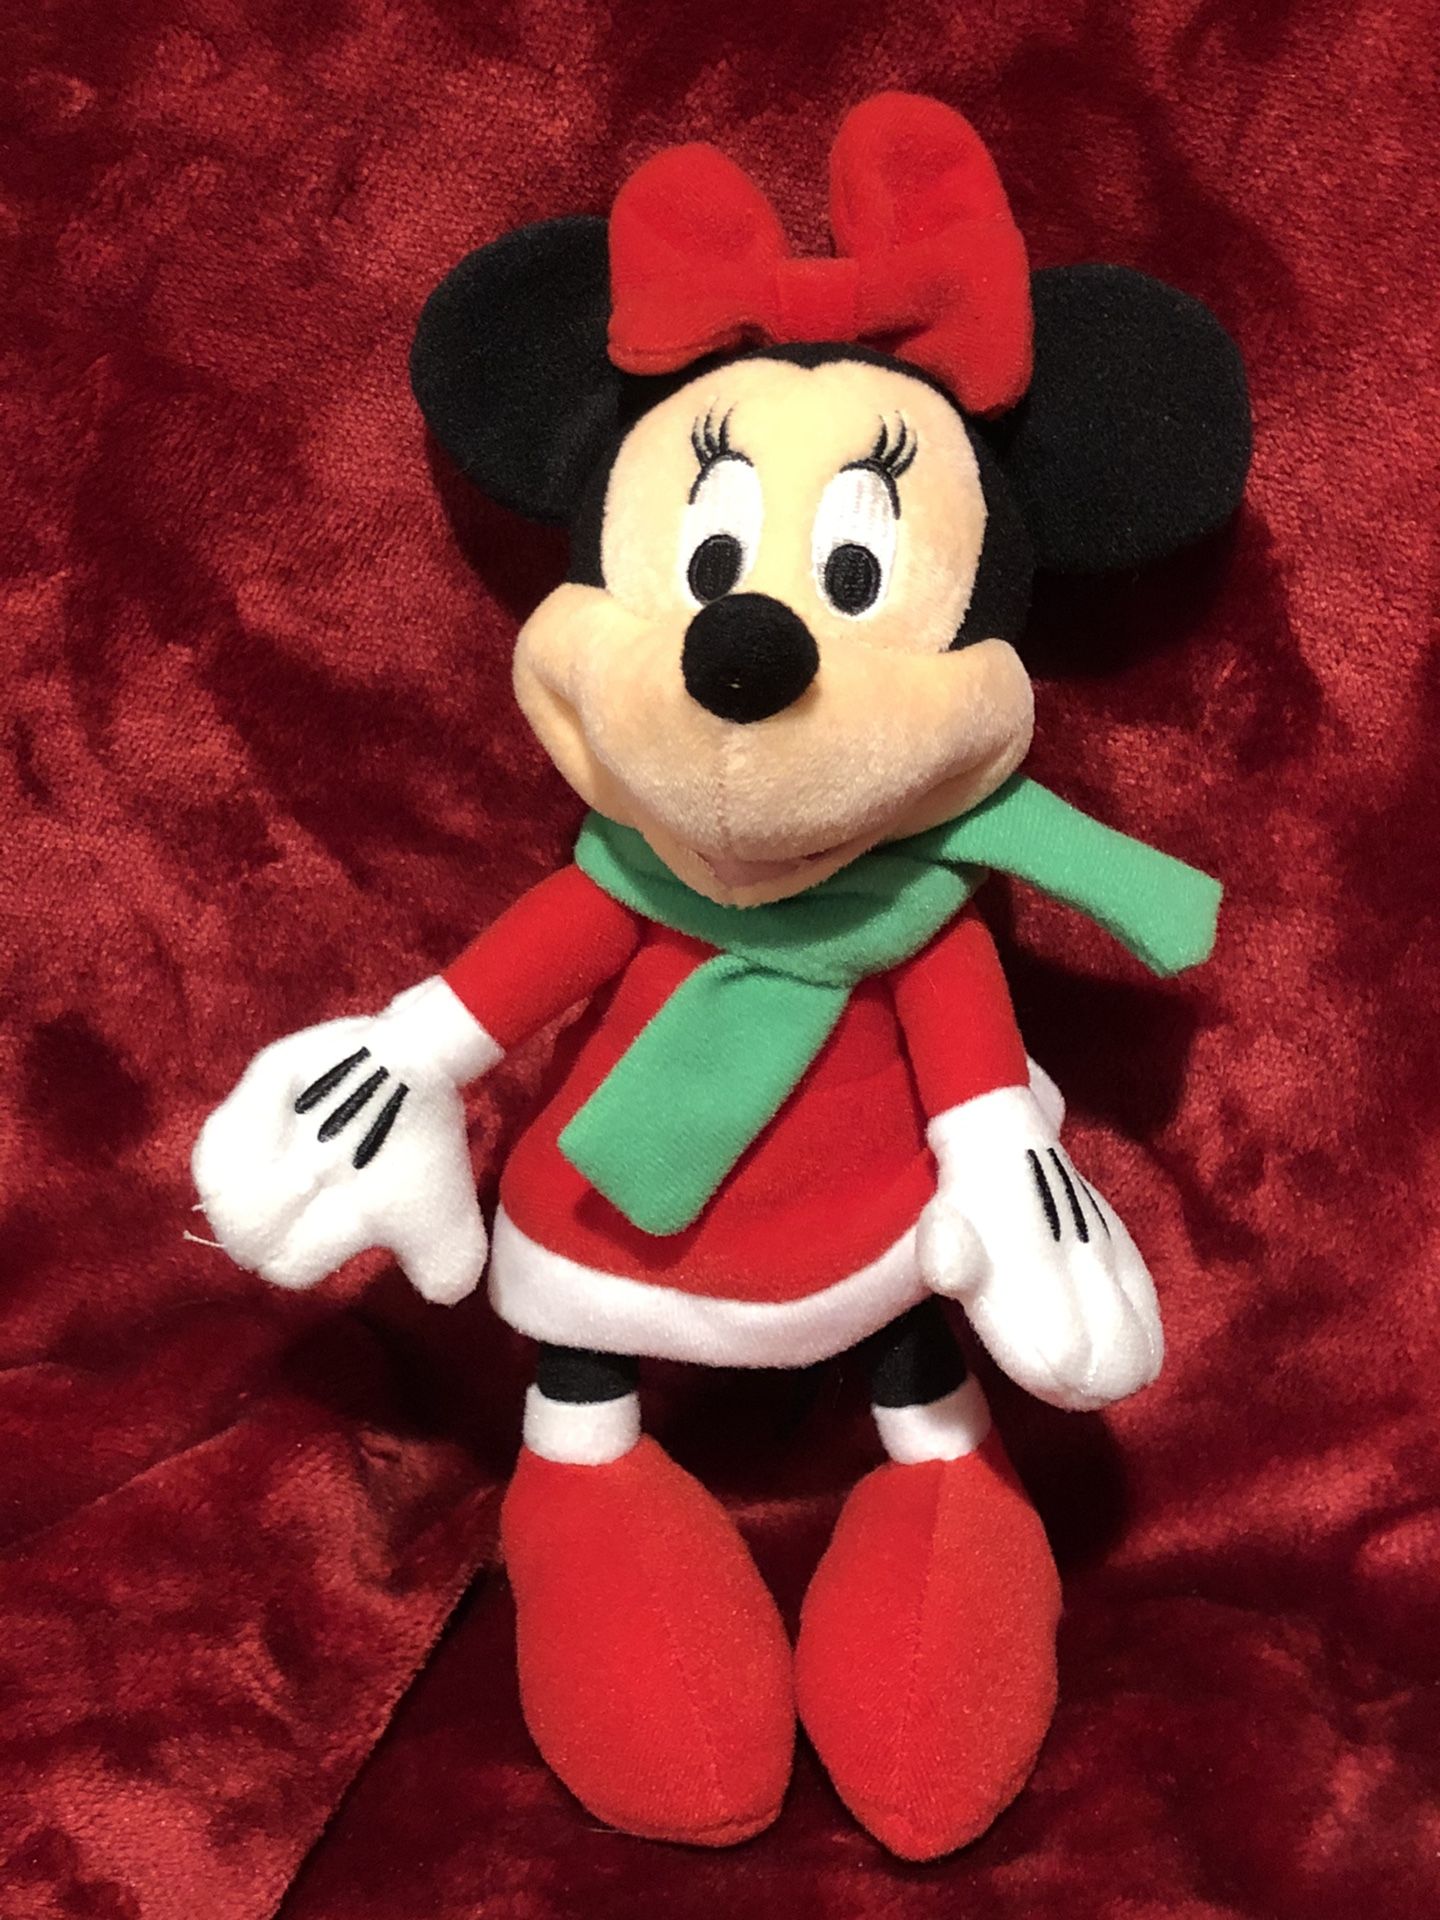 Disney Minnie Mouse Christmas red dress with green scarf and red bow plush plushie stuffed animal toy sale 9” tall. Great for Christmas tree or Chris